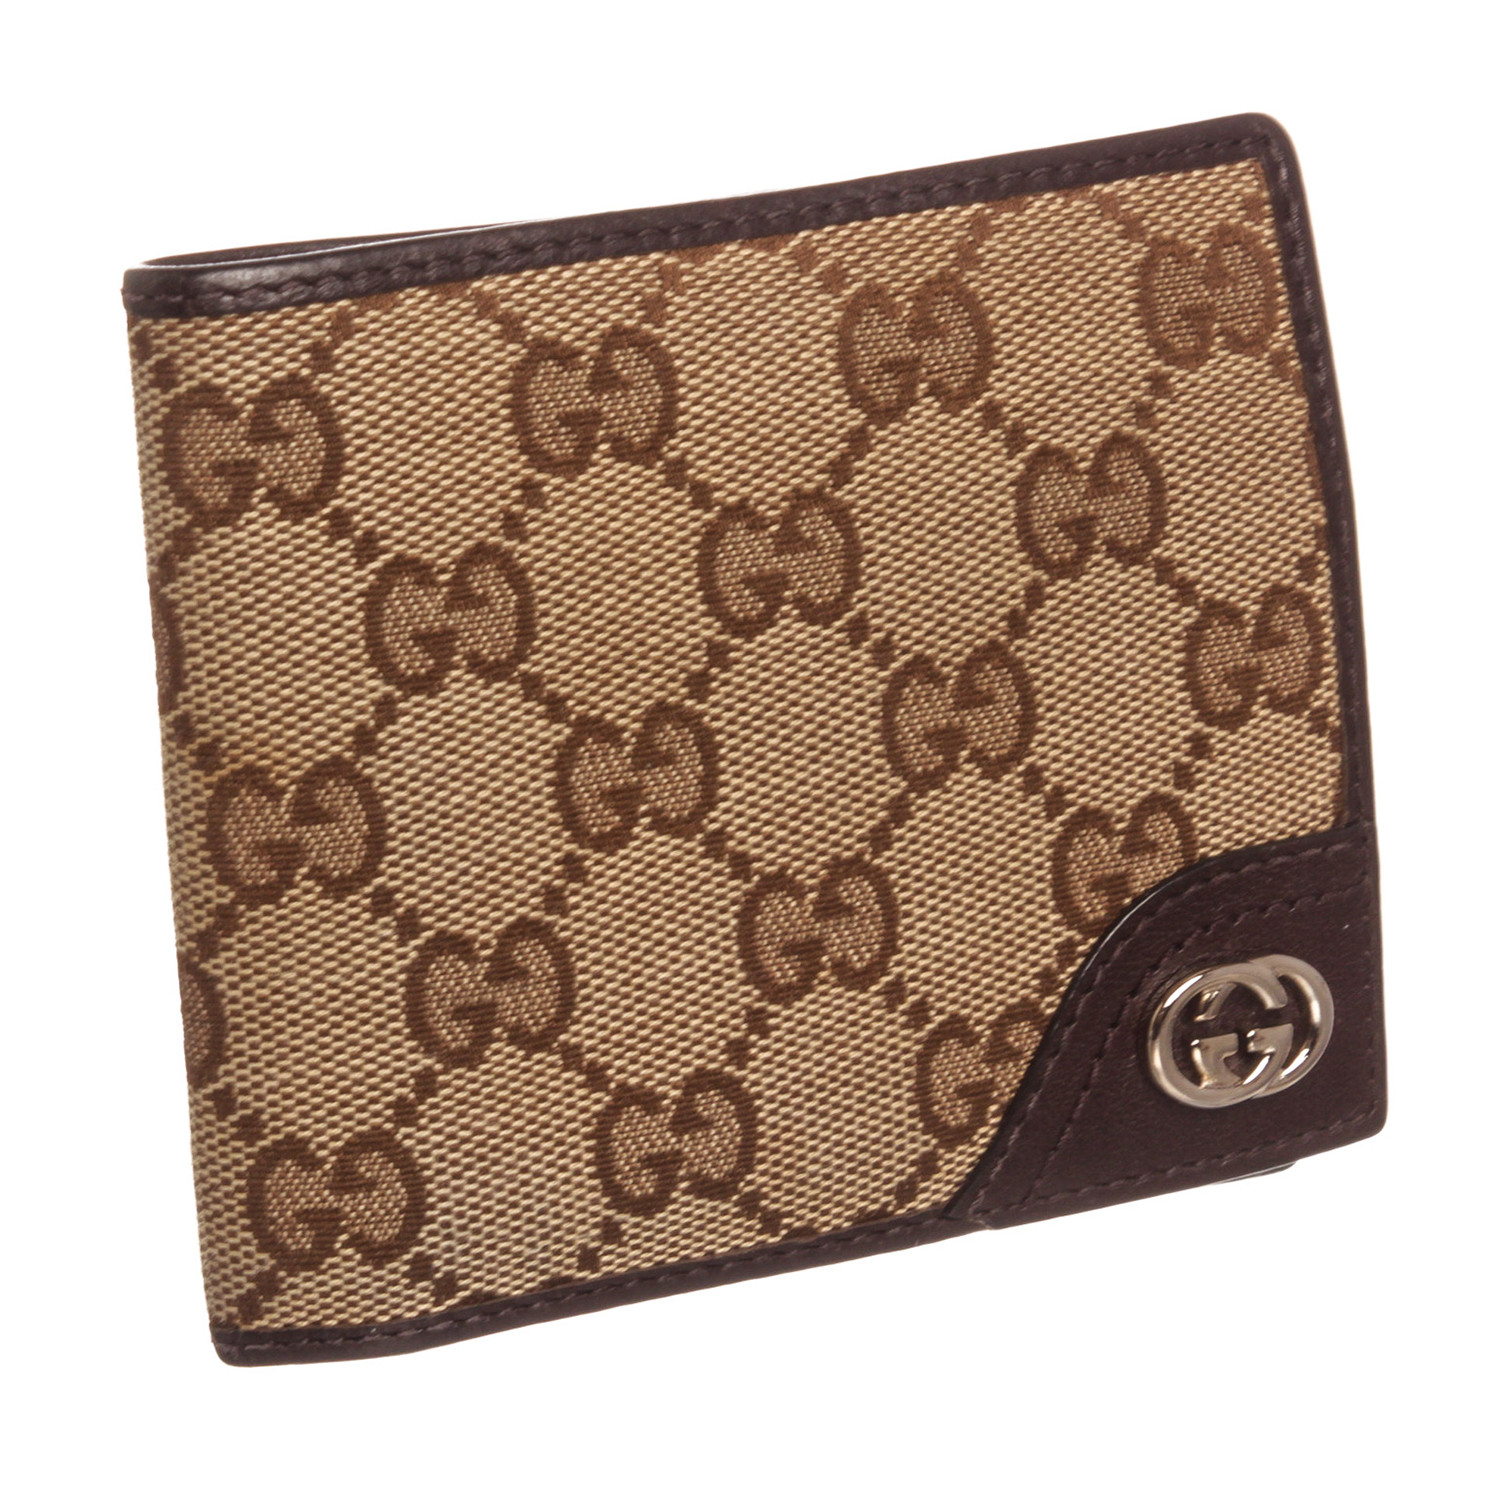 Gucci // Beige Tan GG Canvas Leather Trim Bifold Wallet // 1816712067 // Pre-Owned - Vintage ...